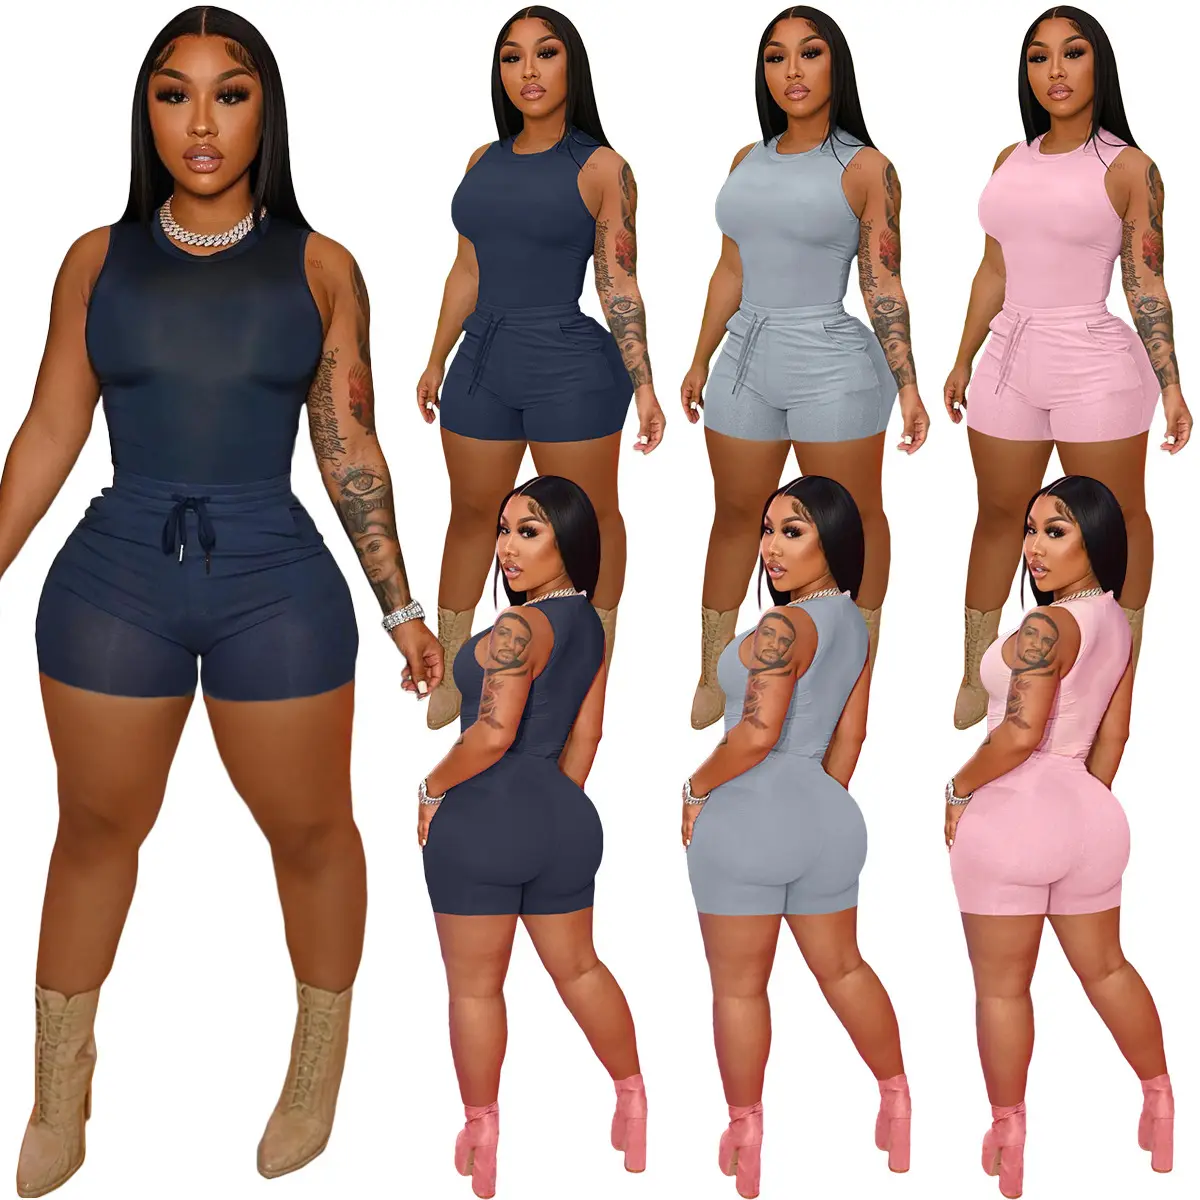 2022 New Spring Summer Vest Outfits Lady Women Sexy Night Club Party Pants 2 Two Piece Outfit Short Tracksuit For Women